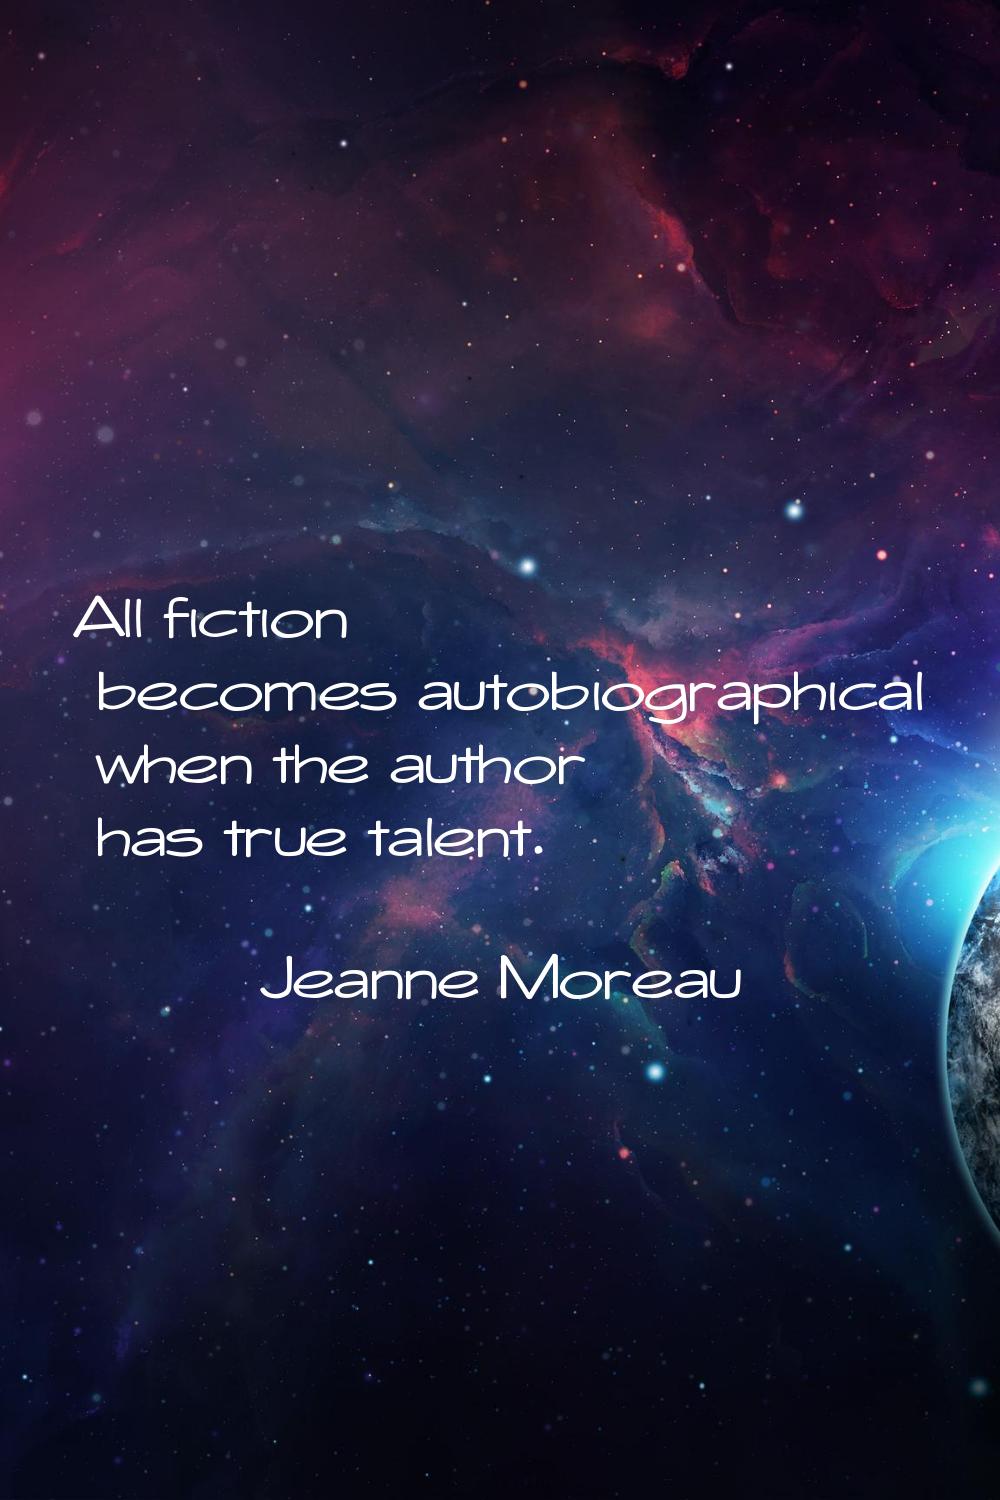 All fiction becomes autobiographical when the author has true talent.